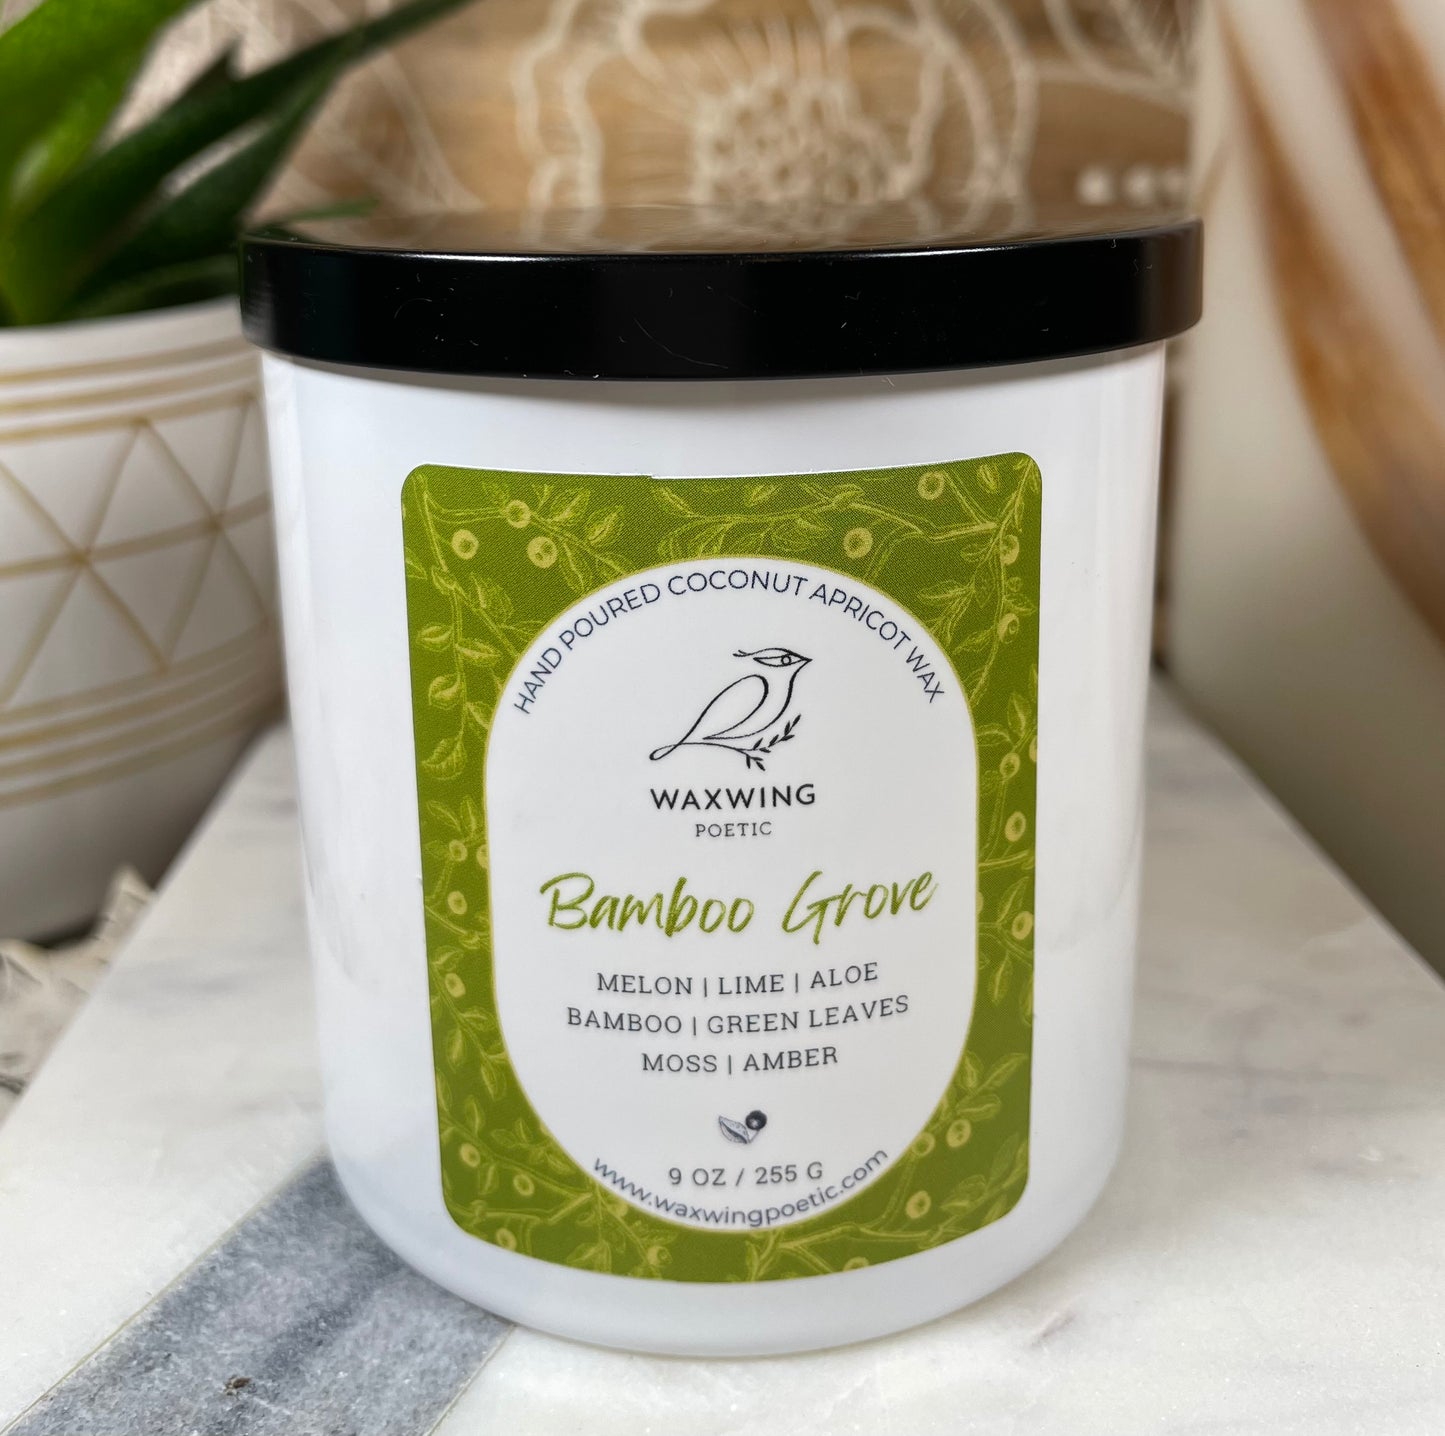 Bamboo Grove | Coconut Apricot Wax Candle